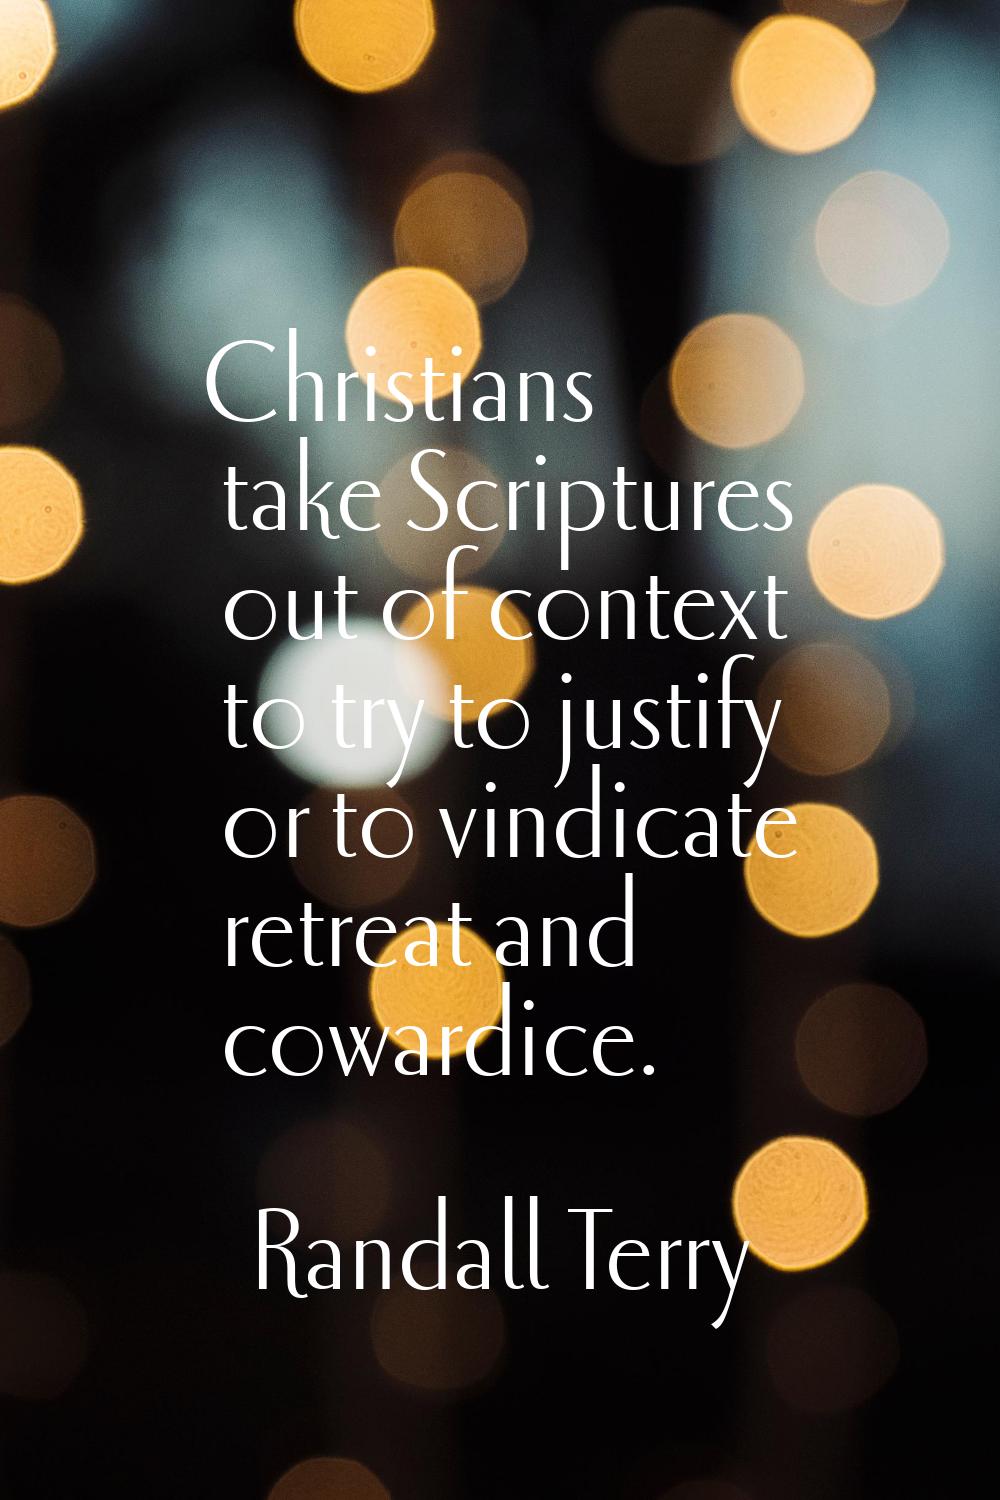 Christians take Scriptures out of context to try to justify or to vindicate retreat and cowardice.